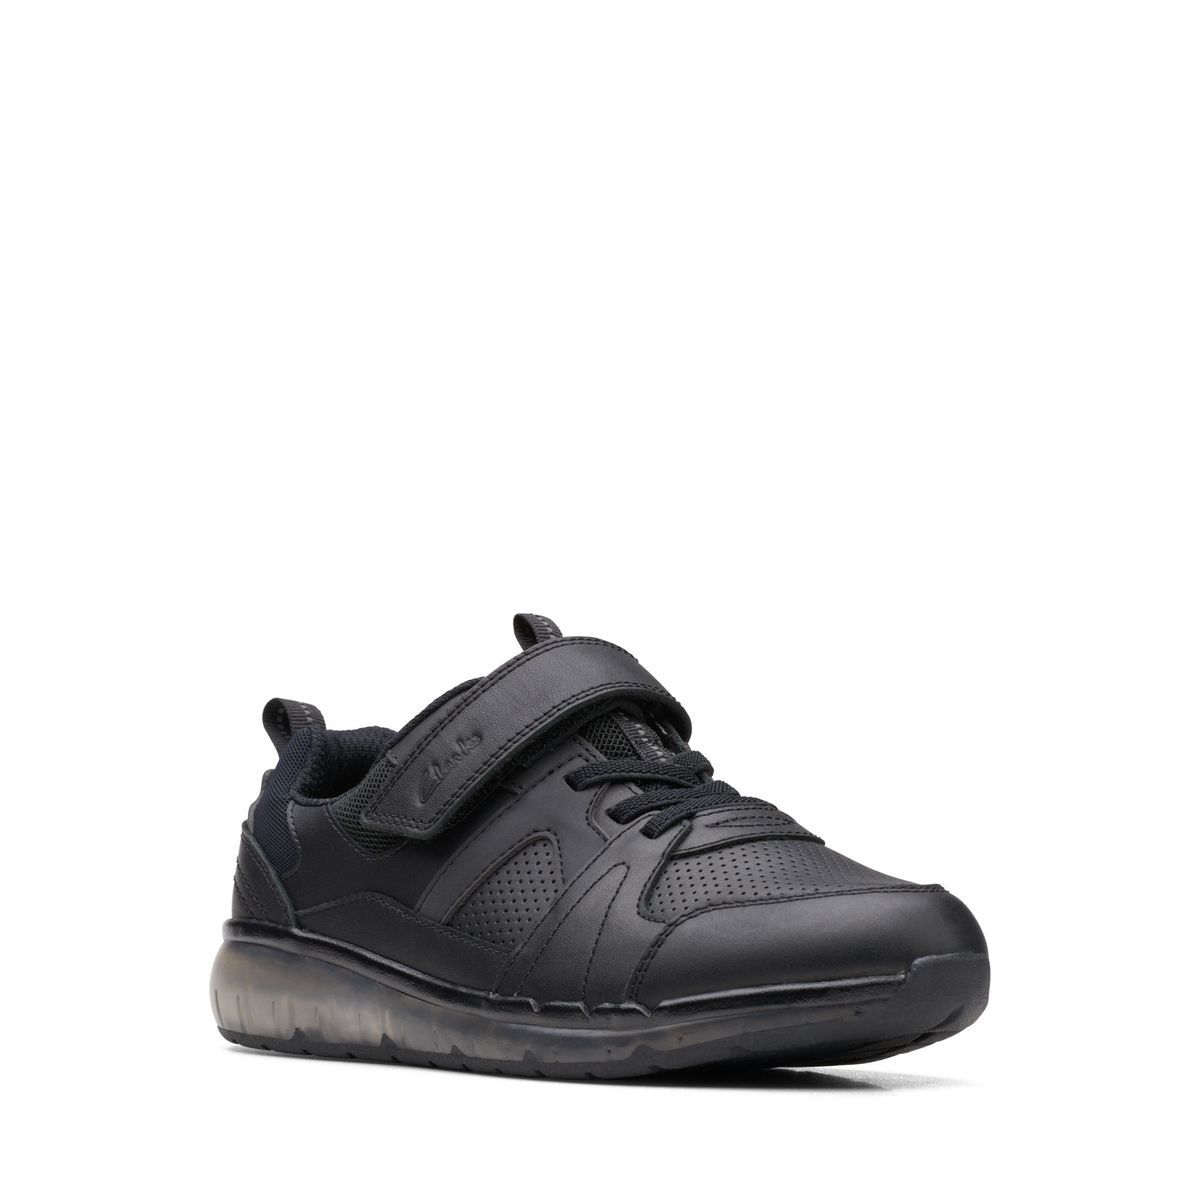 Clarks Spark Beam O Black Leather Kids Boys Trainers 679186F In Size 2.5 In Plain Black Leather F Width Fitting Regular Fit For kids